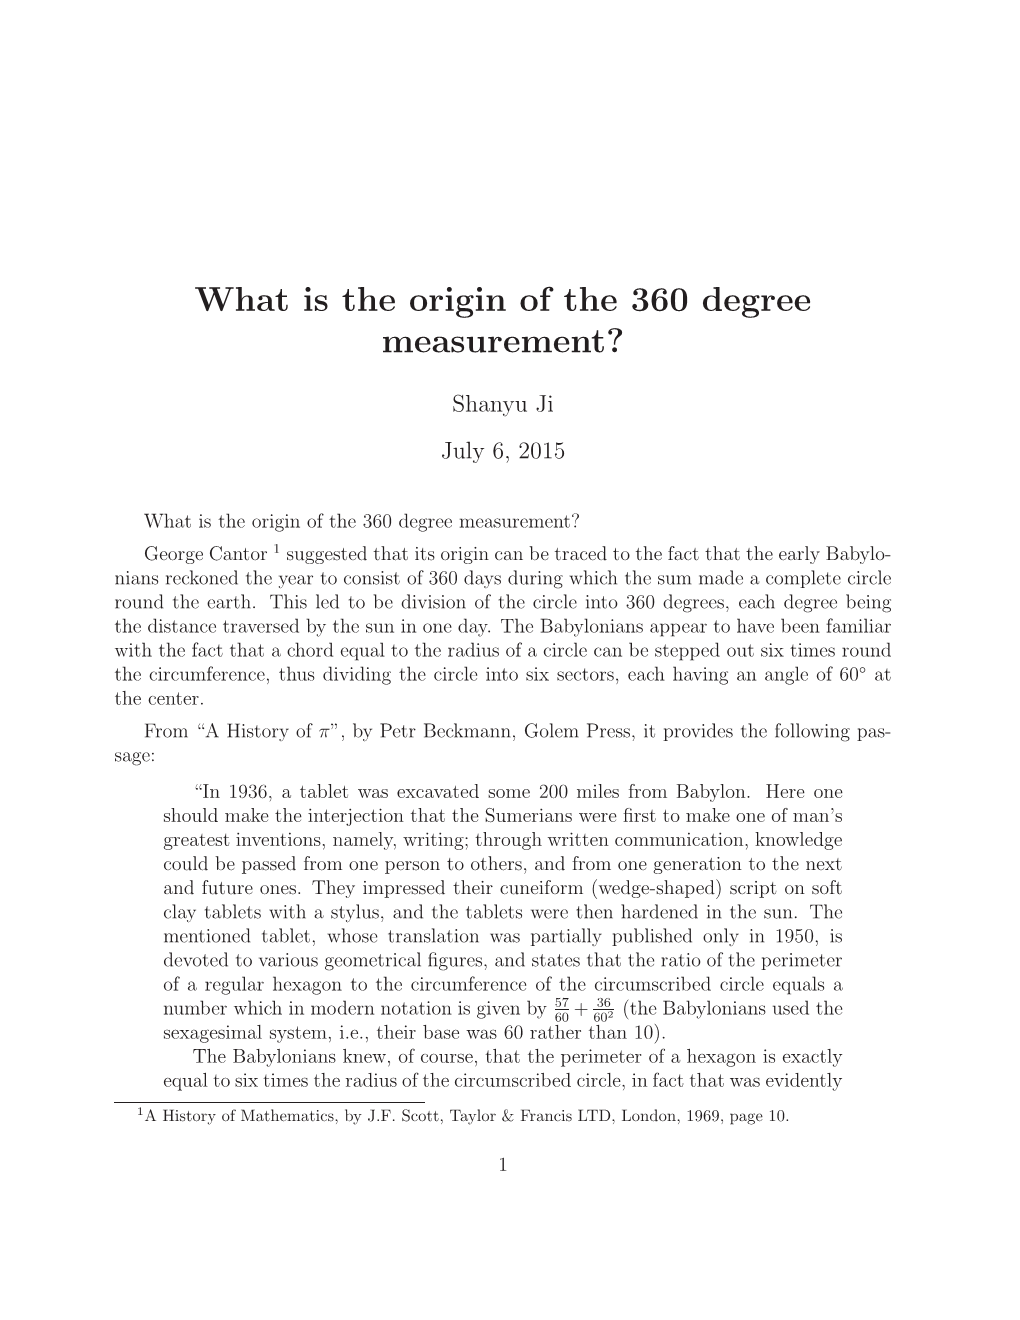 What Is the Origin of the 360 Degree Measurement?